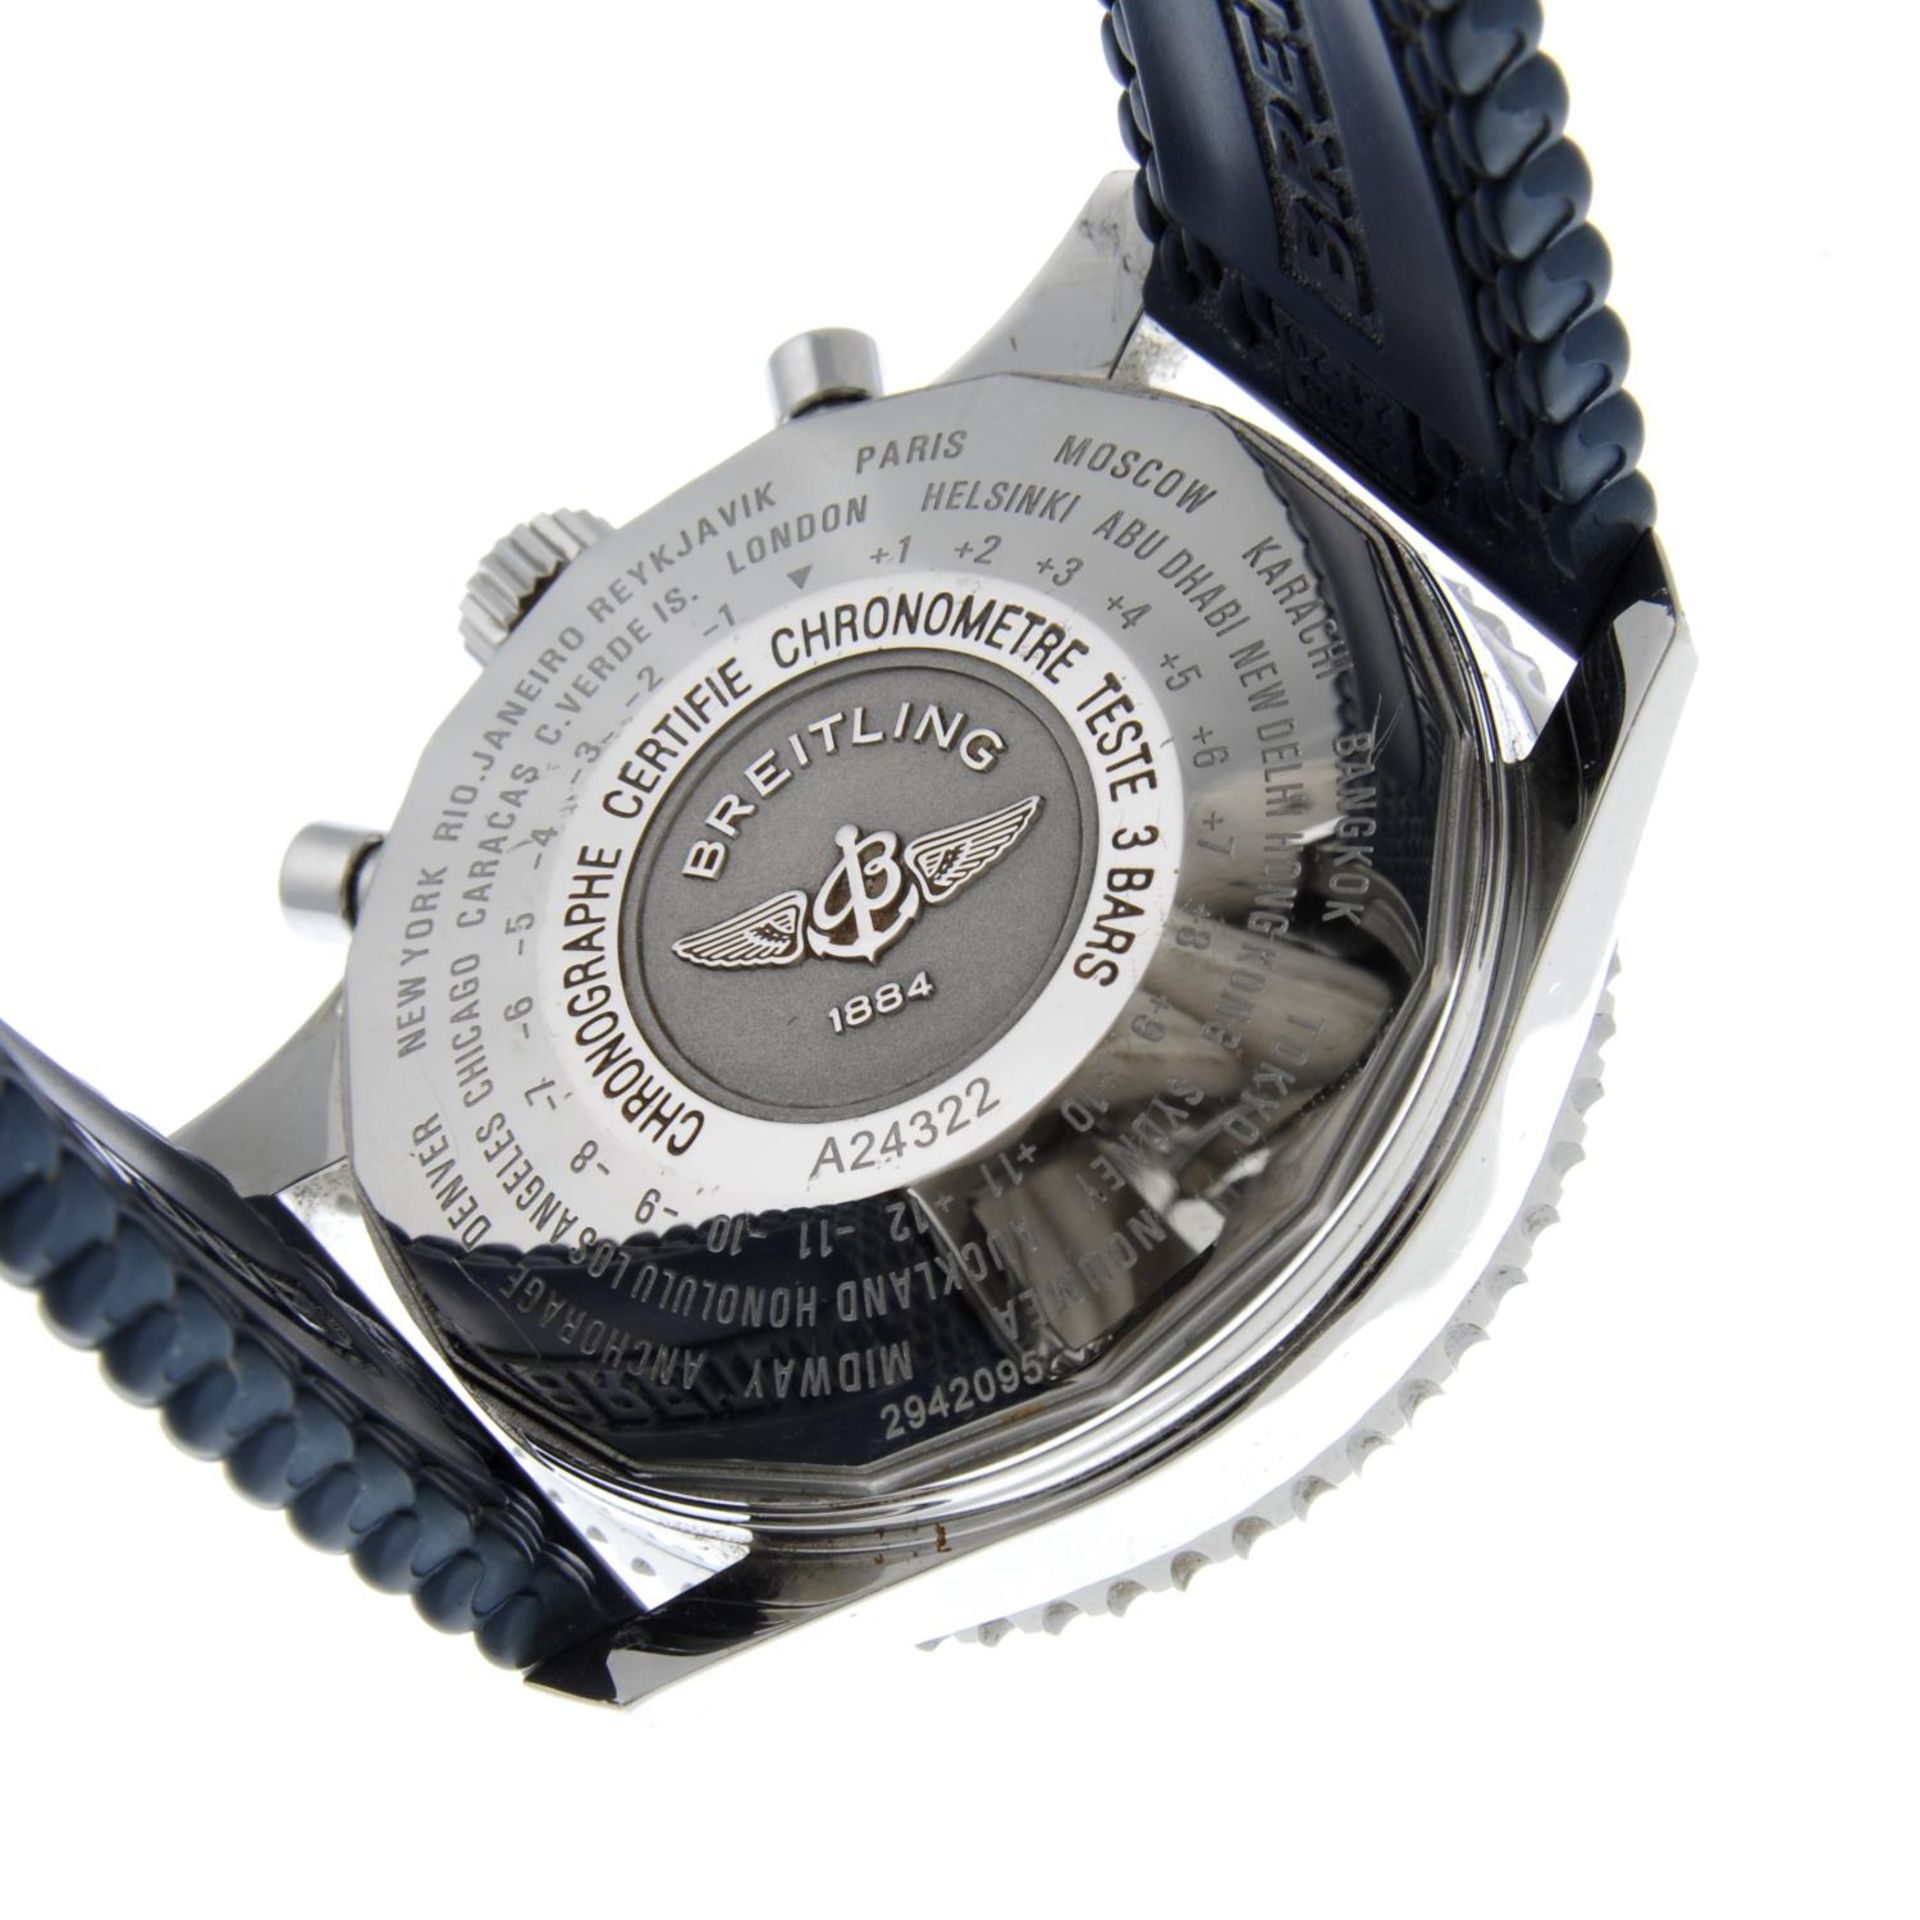 BREITLING - a Navitimer World GMT chronograph wrist watch. - Image 6 of 6